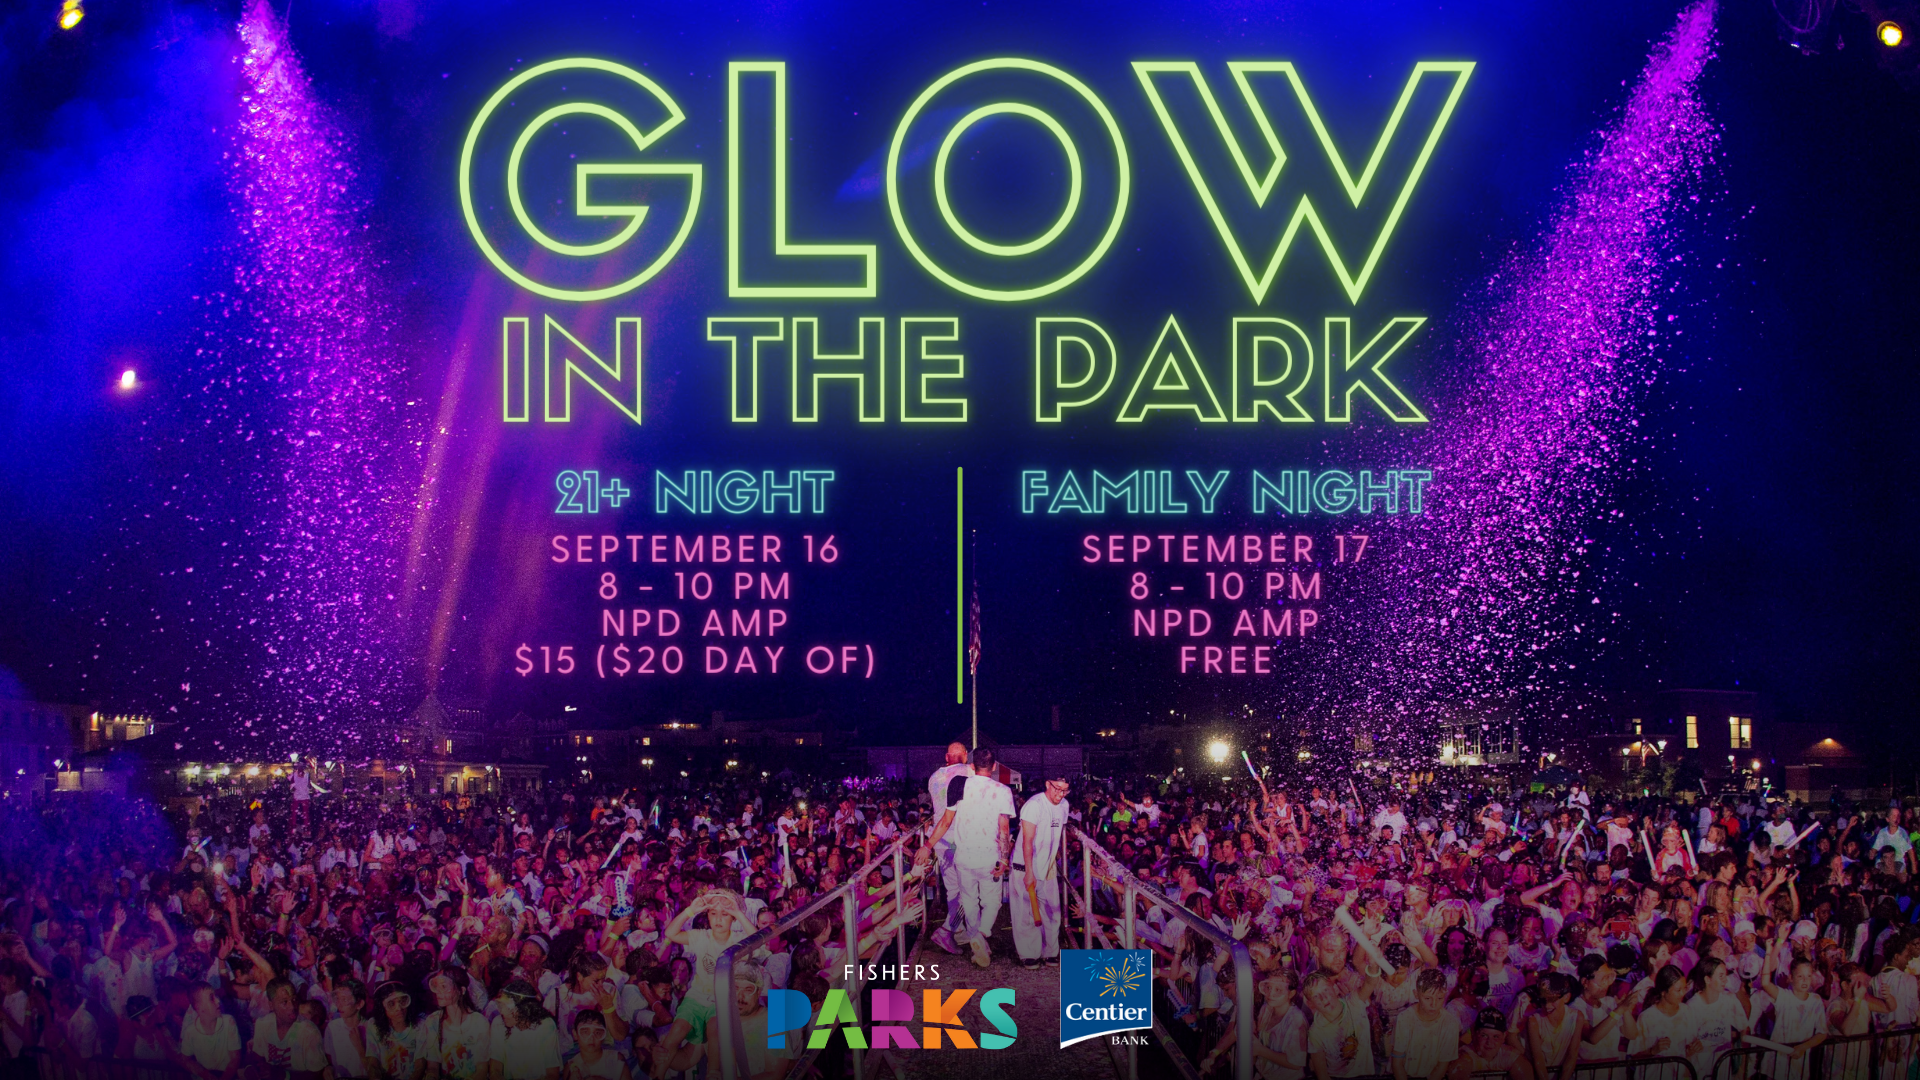 Glow in the Park 21+ Night September 22 8-10pm NPD Amp $20 per person Family Night September 23 8-10 pm NPD Amp $5 per person